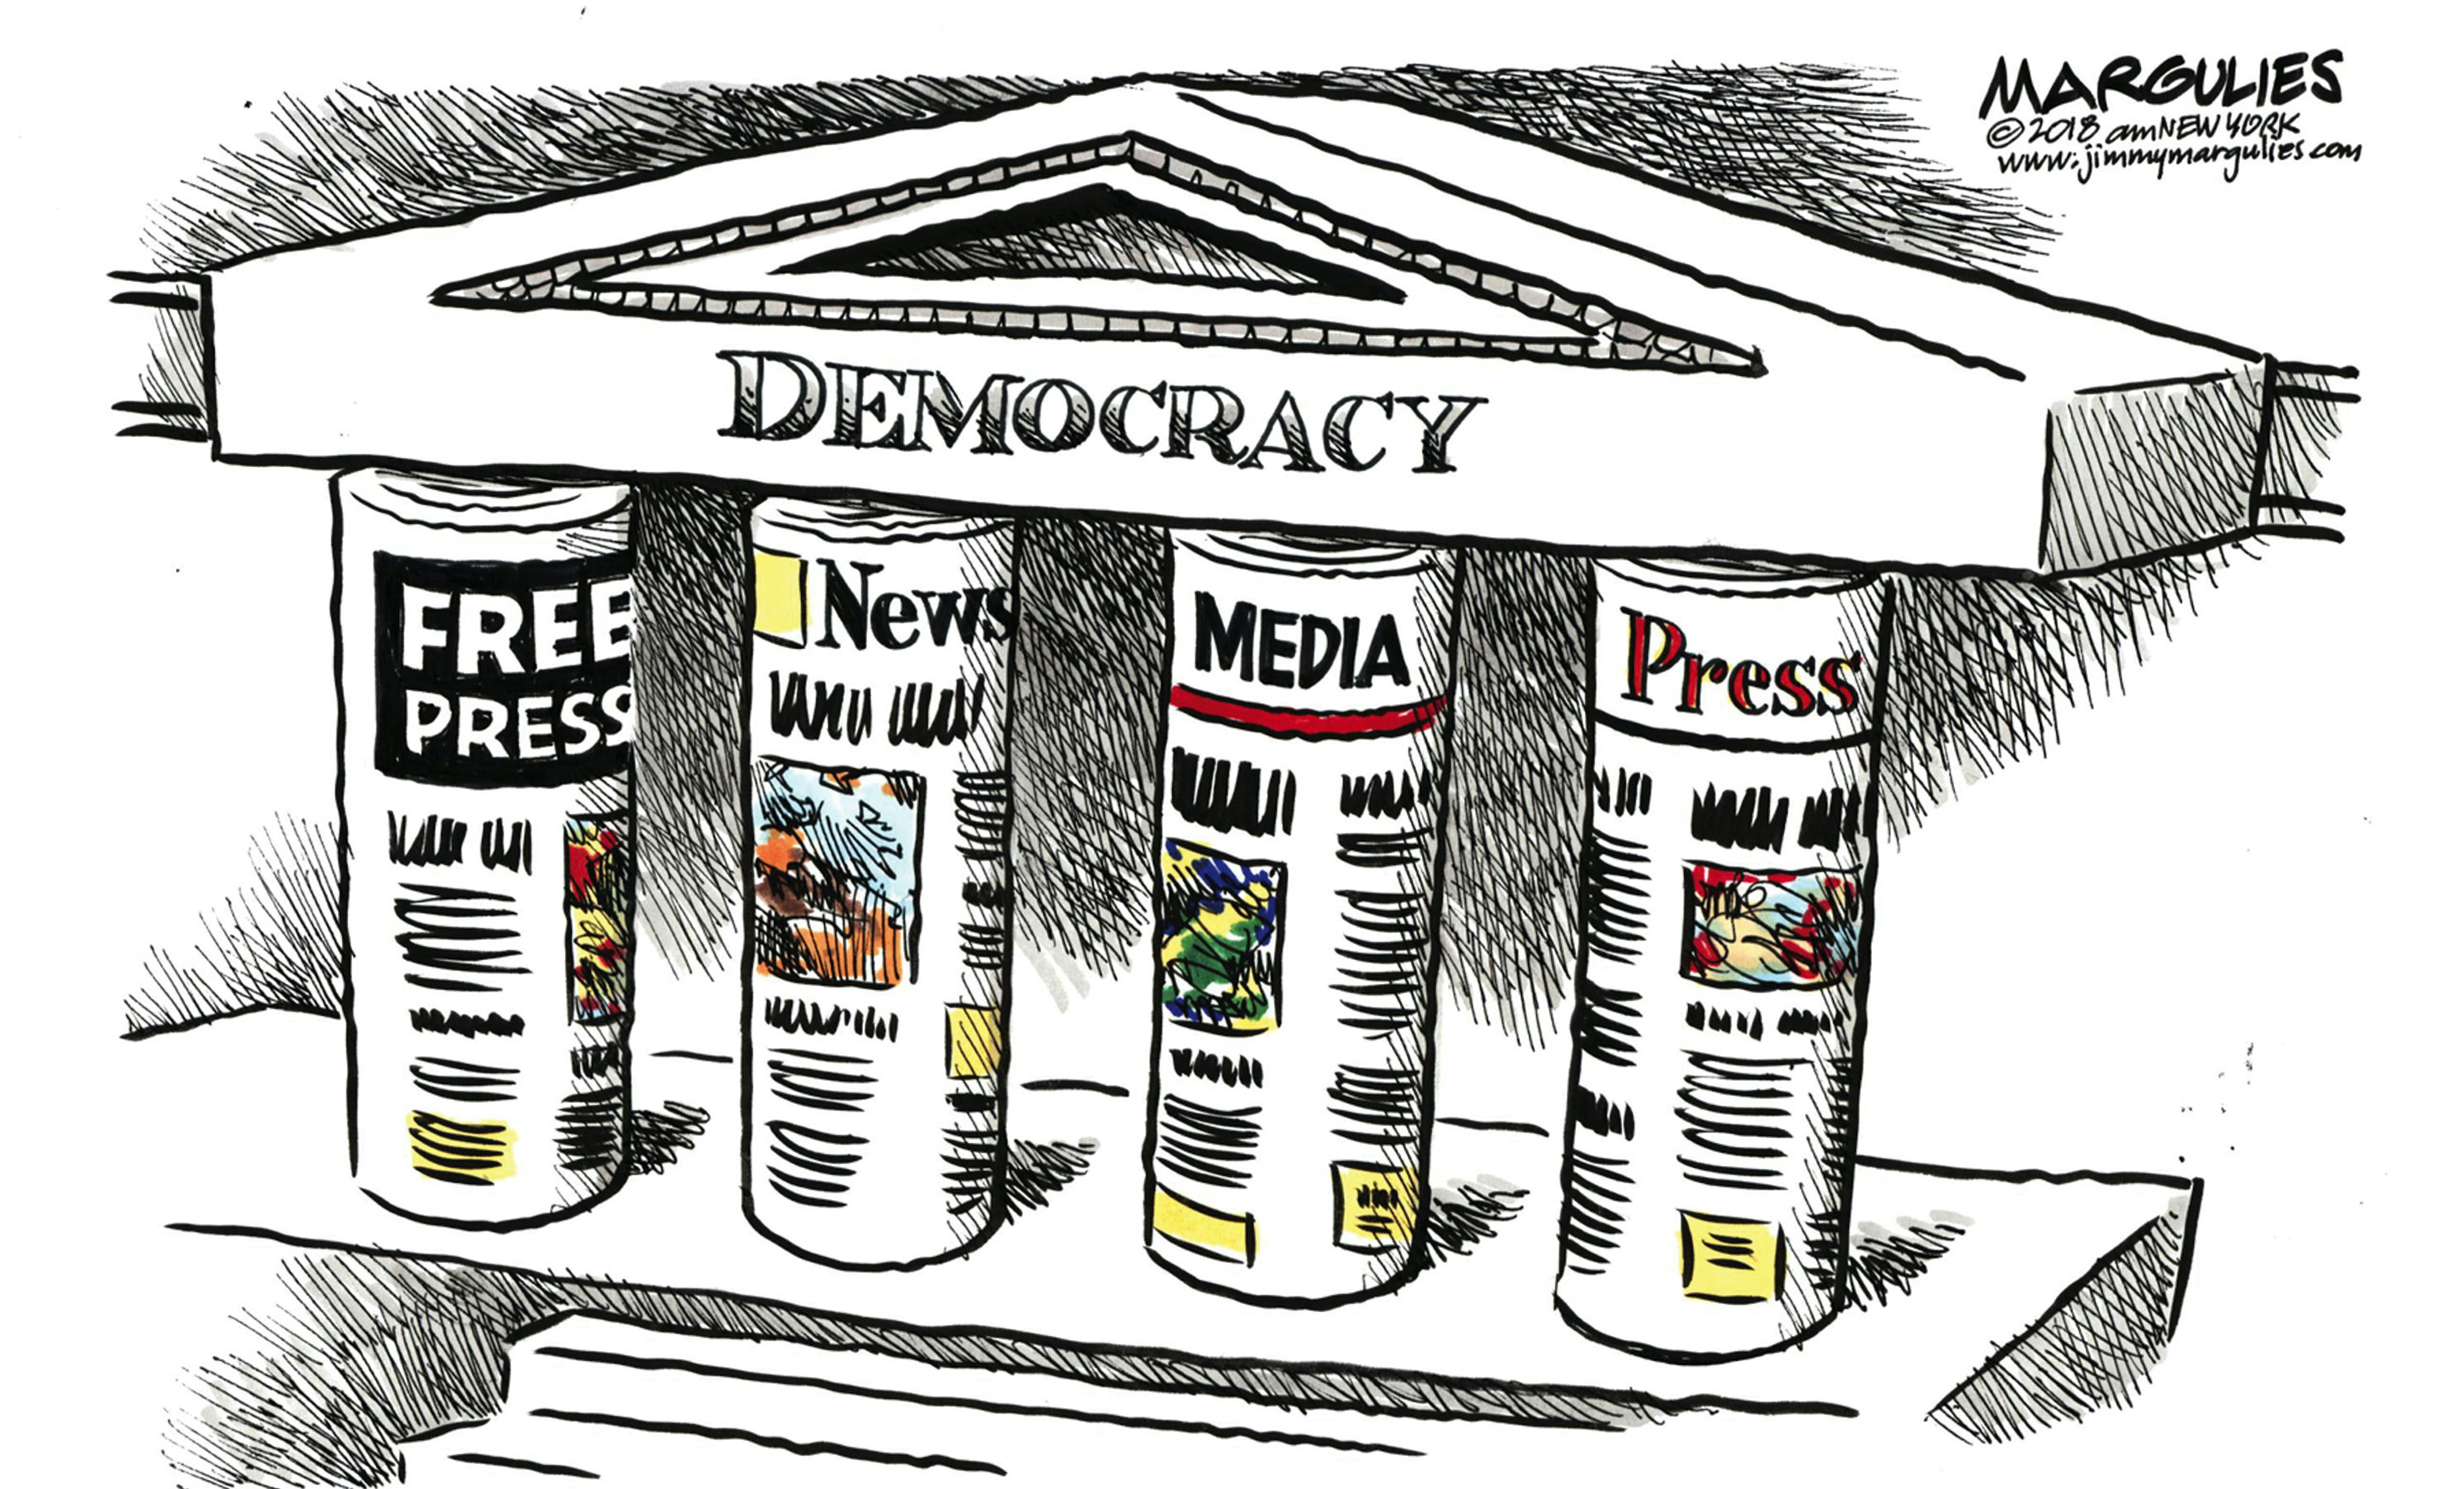 Will the Press Do Its Job to Help Save Democracy? The New Republic